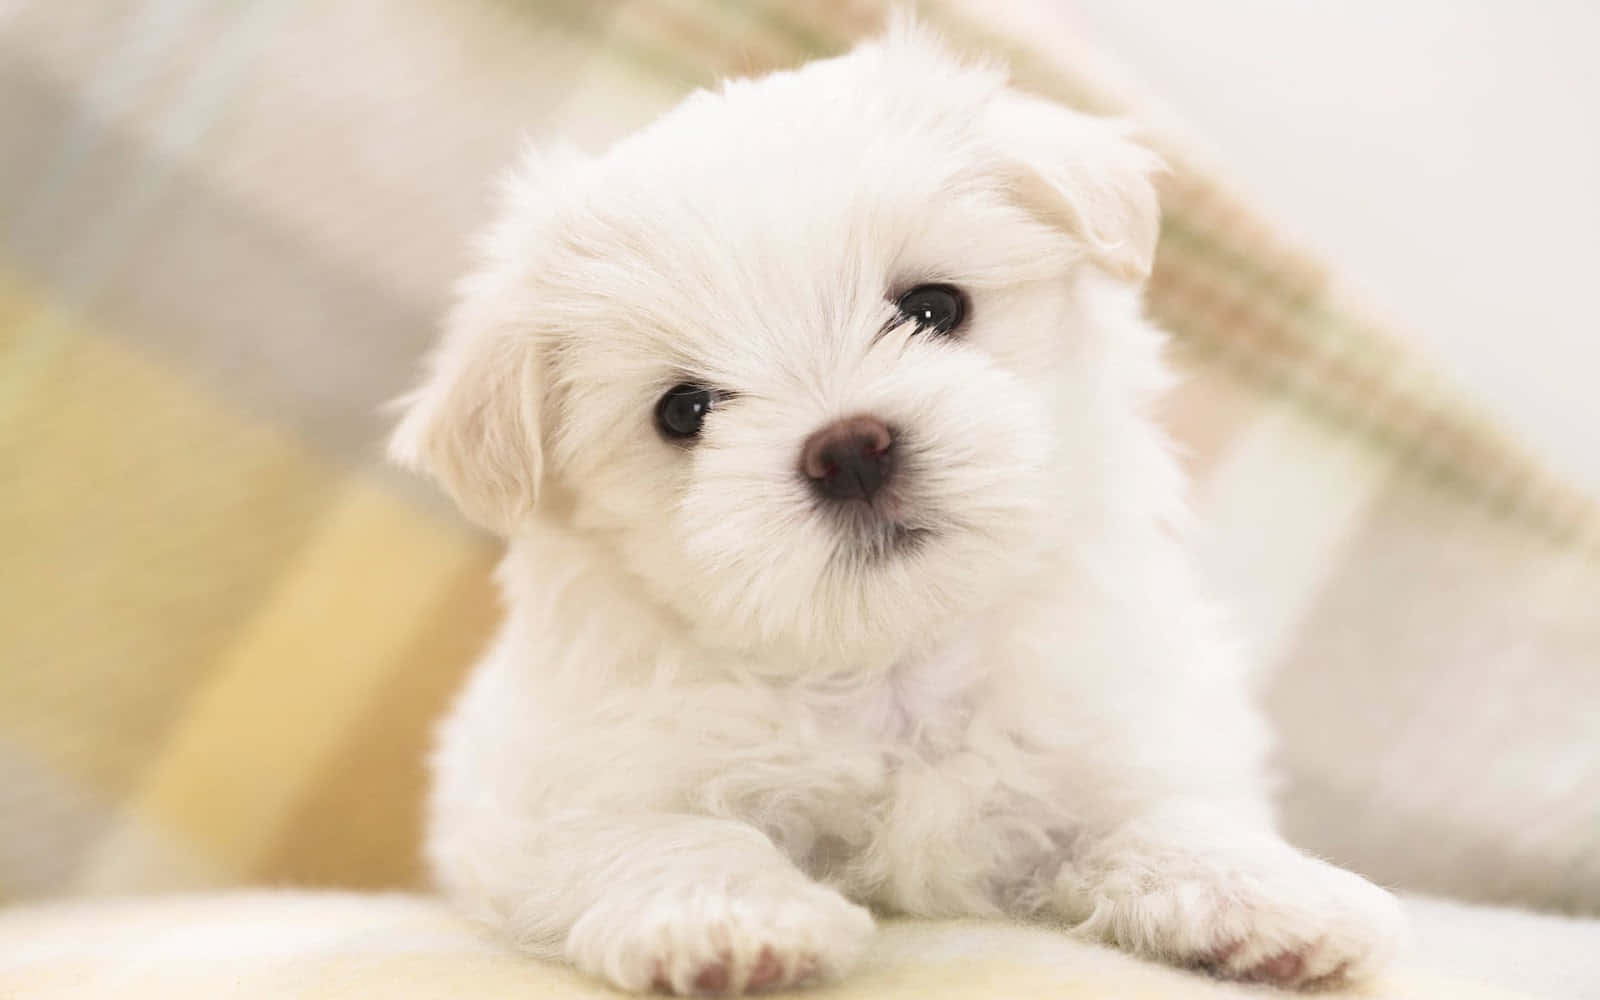 A cute Maltese Puppy looking up with loving eyes